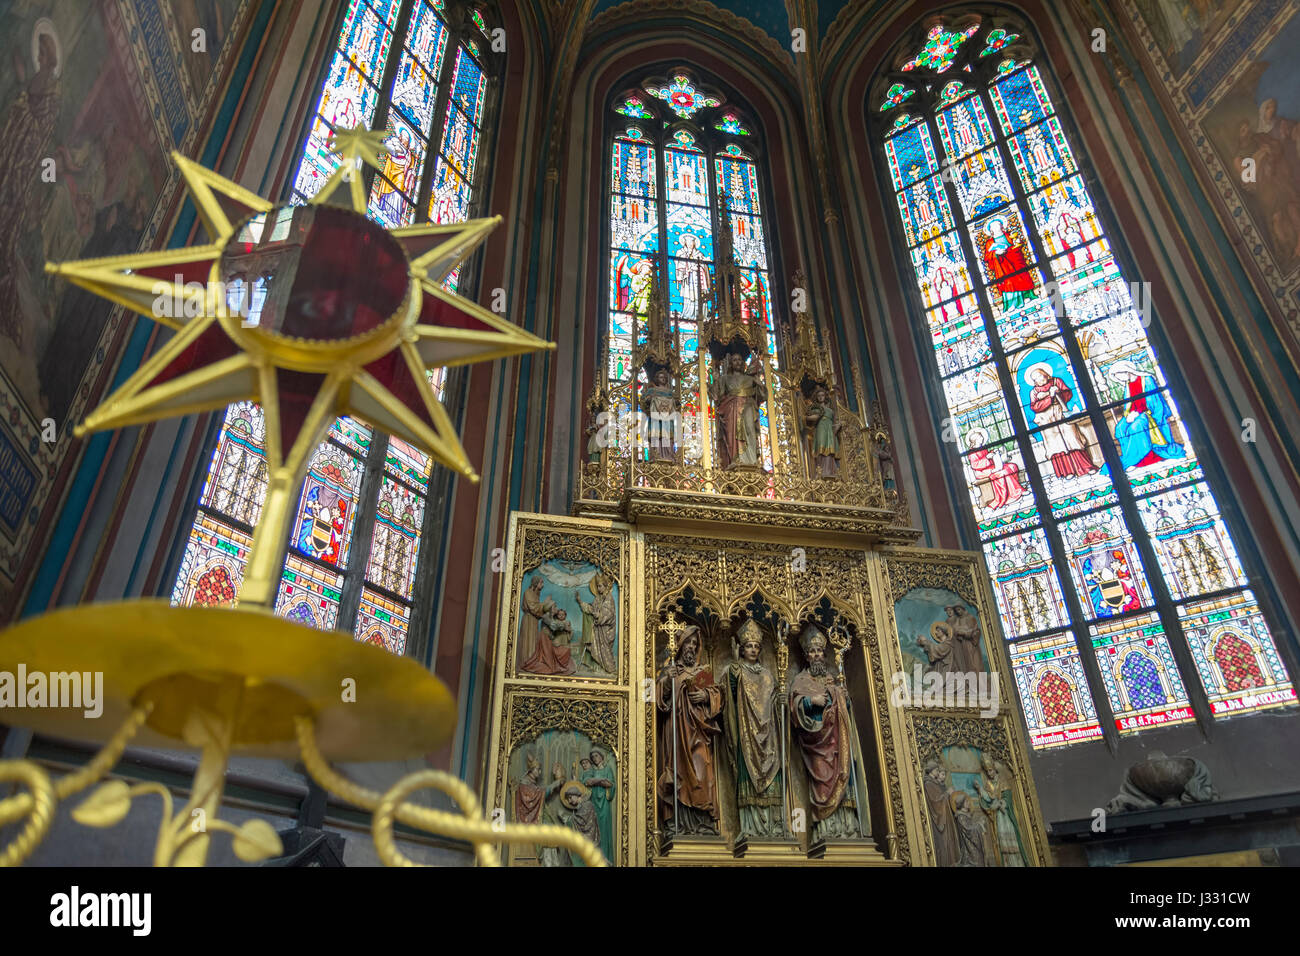 PRAGUE, CZECH REPUBLIC, JULY 7,2016: Interior detail from St. Vitus Cathedral, a Roman Catholic metropolitan cathedral in Prague. Stock Photo